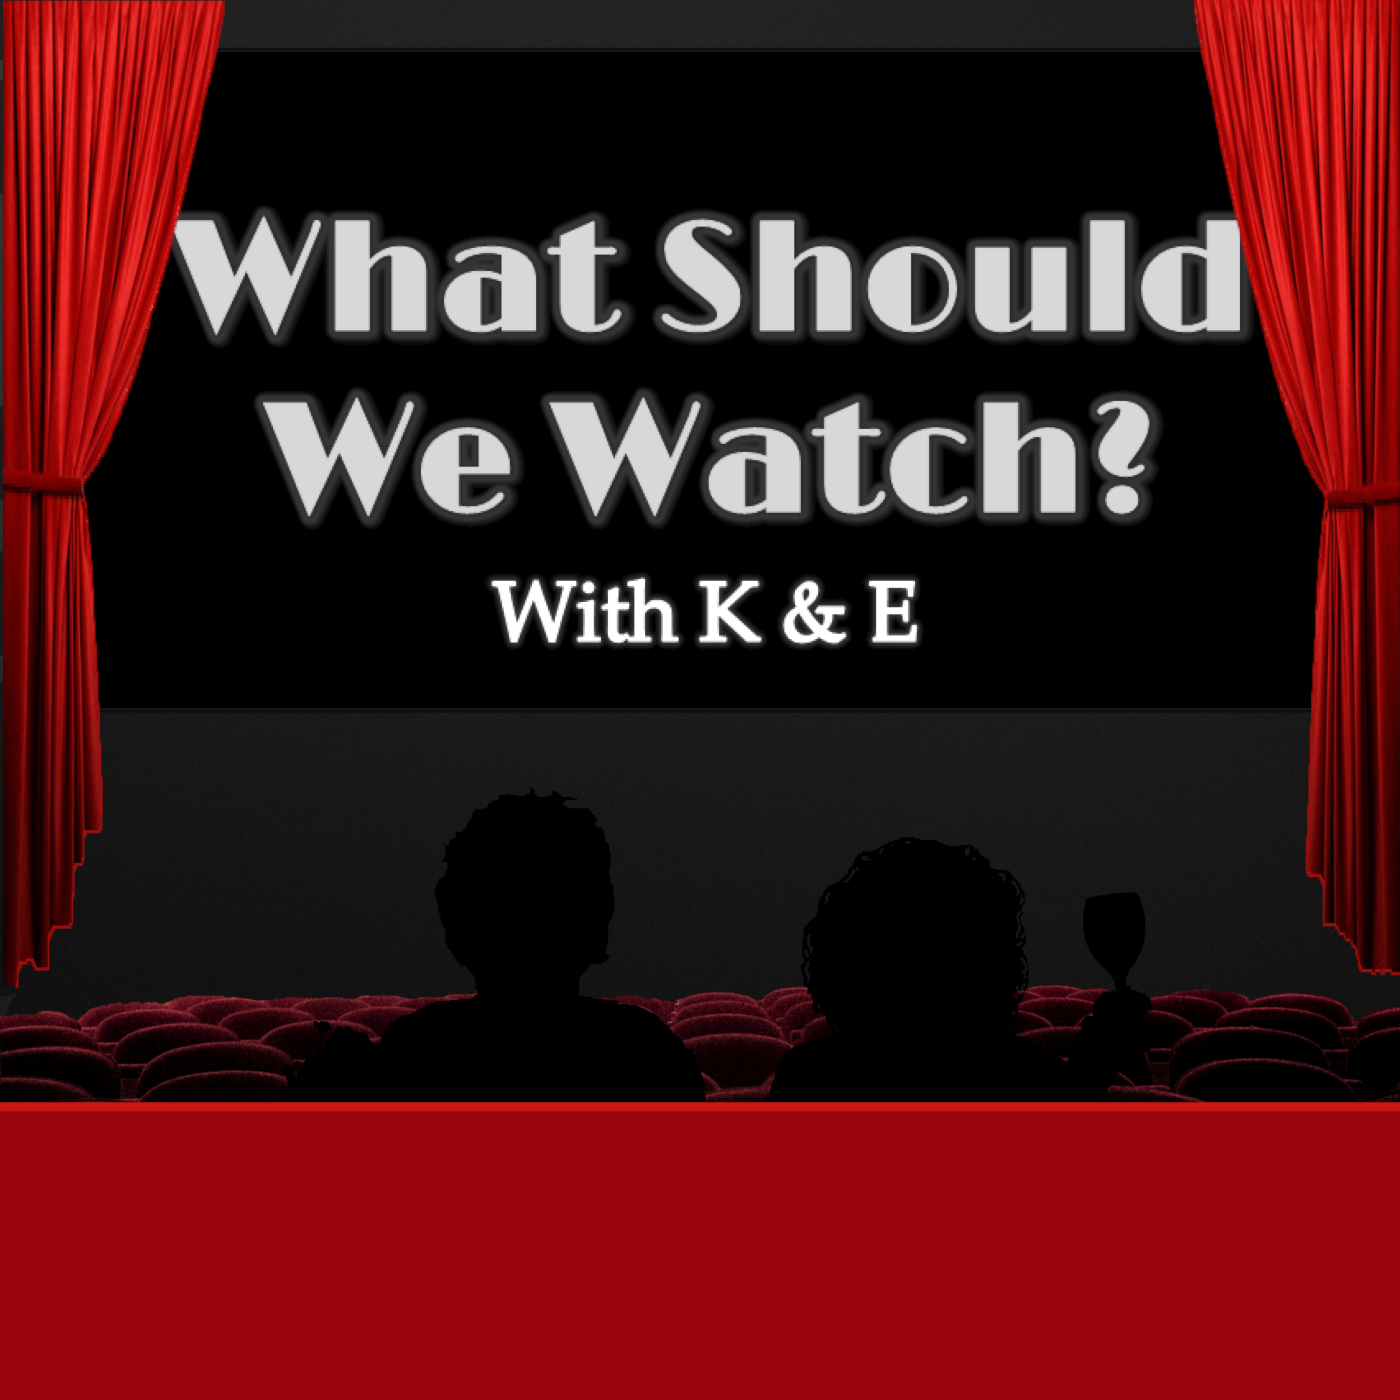 What Should We Watch? With K & E